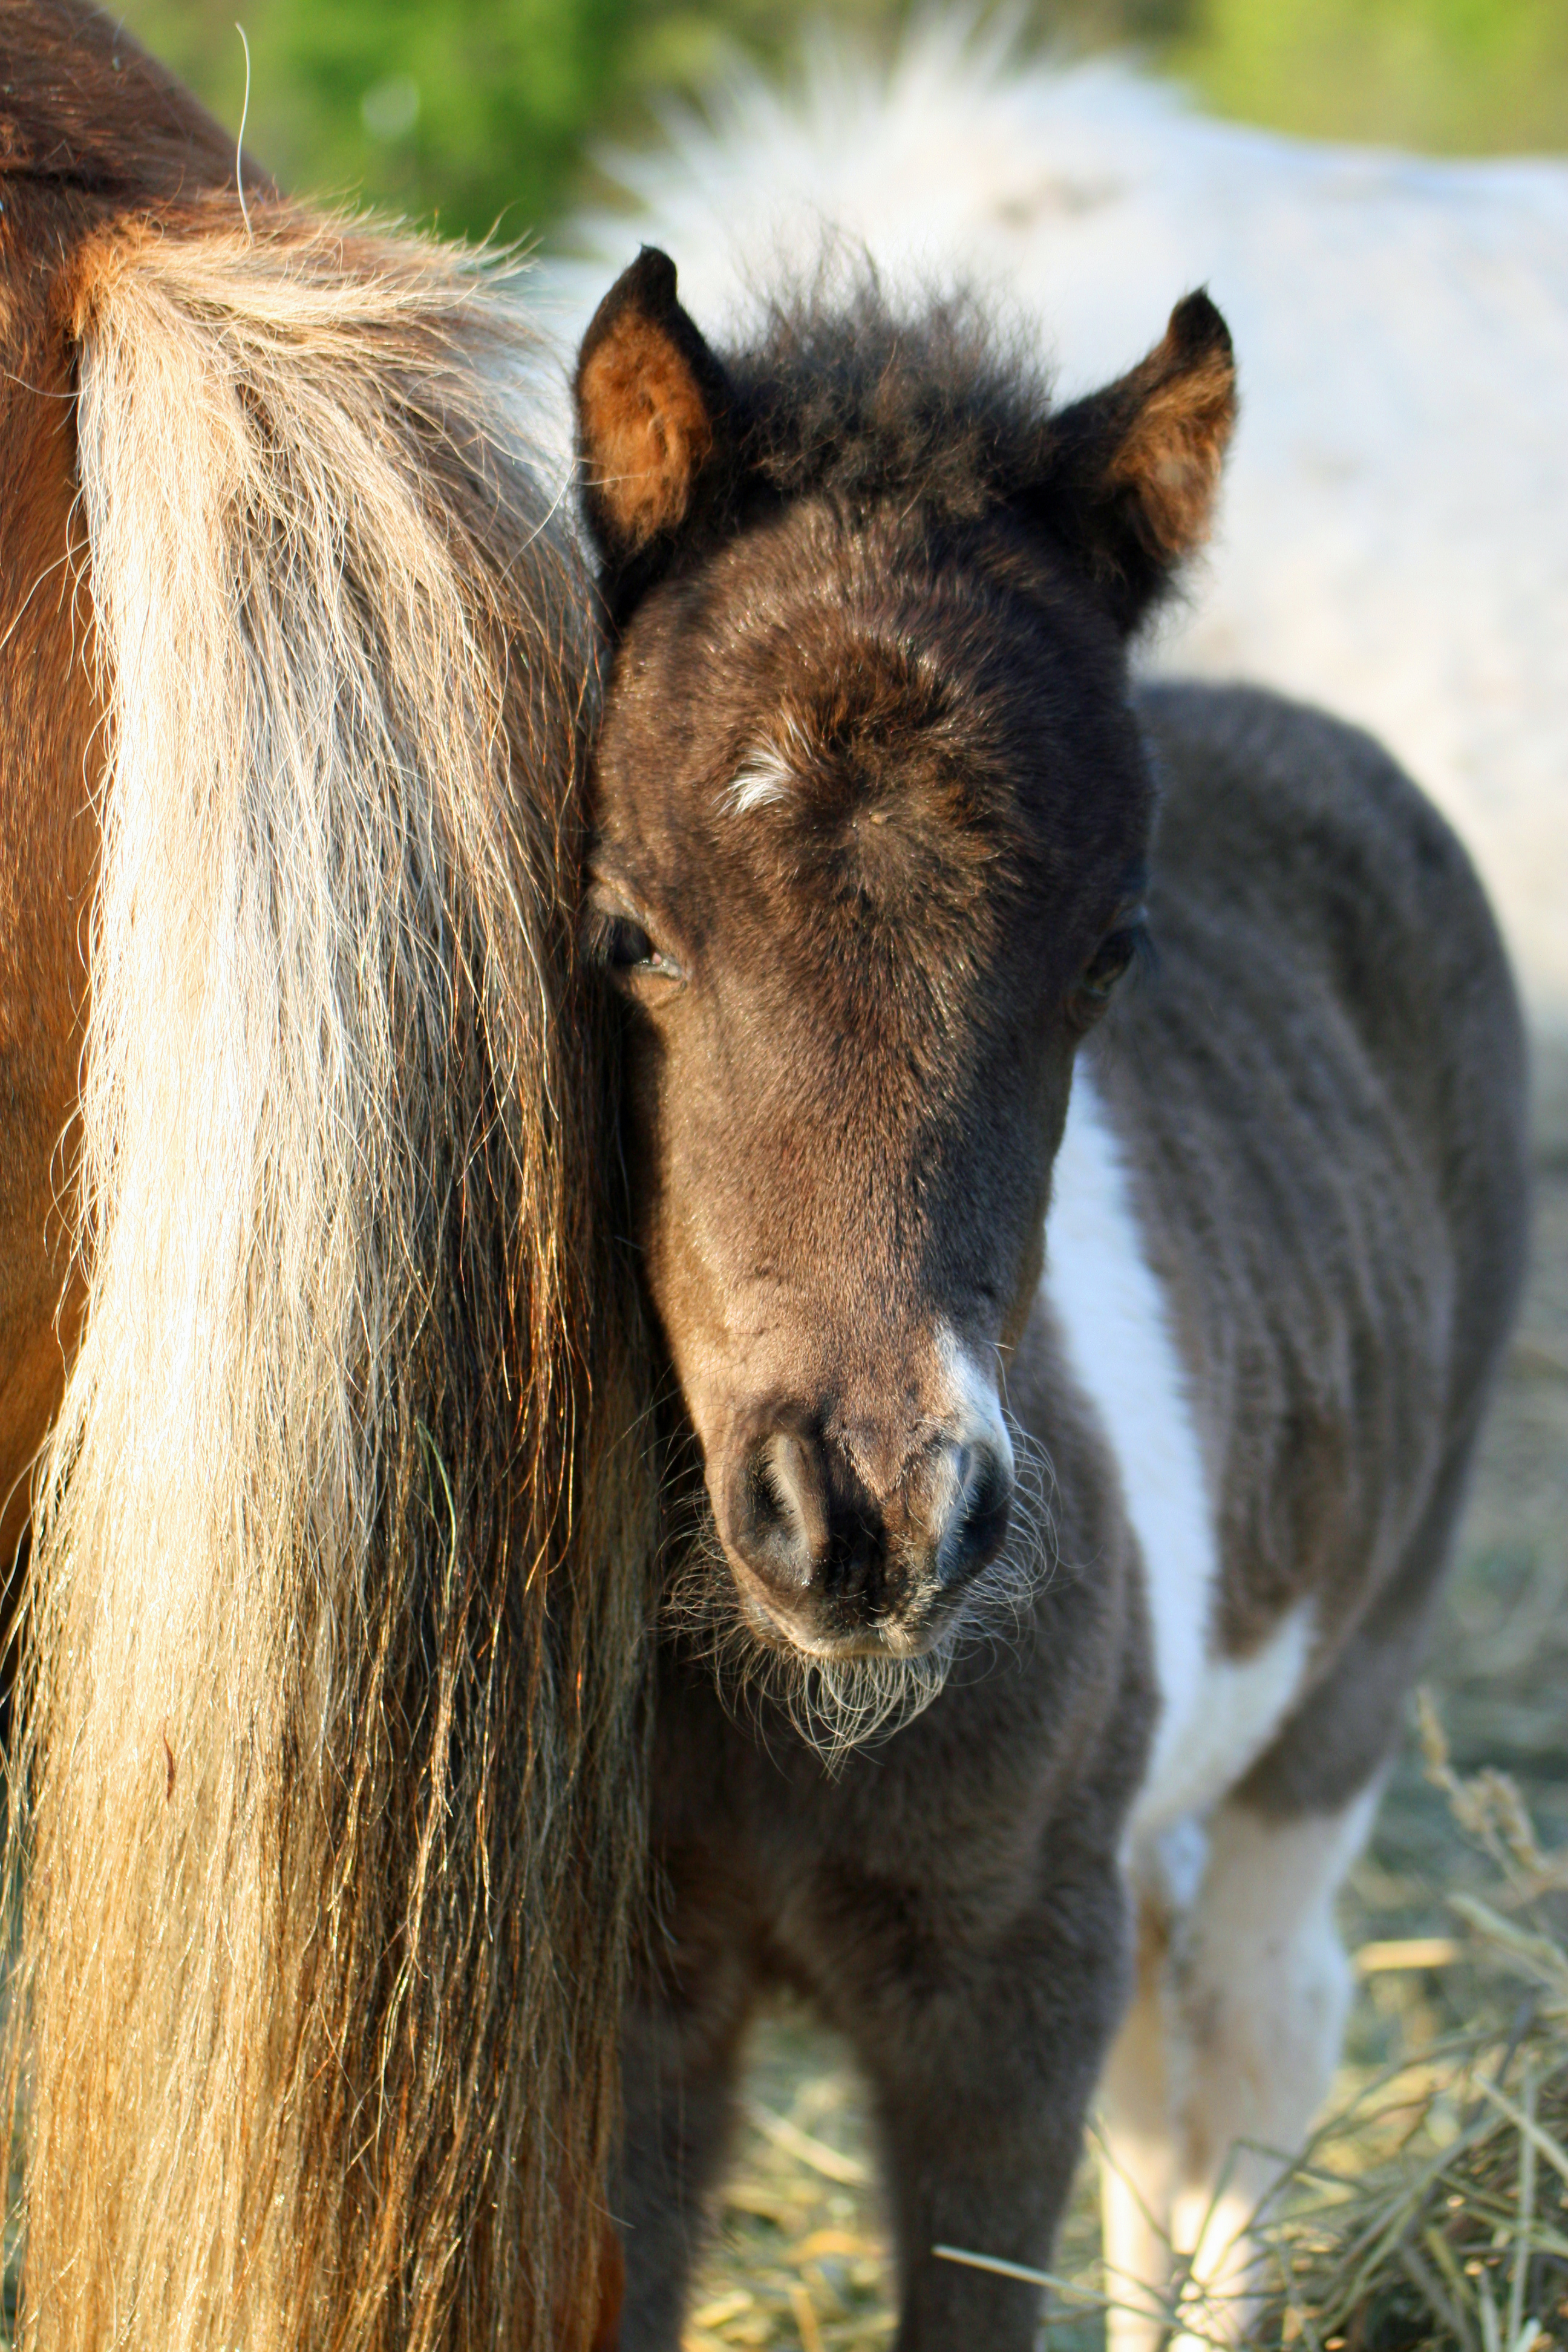 A gorgeous filly!